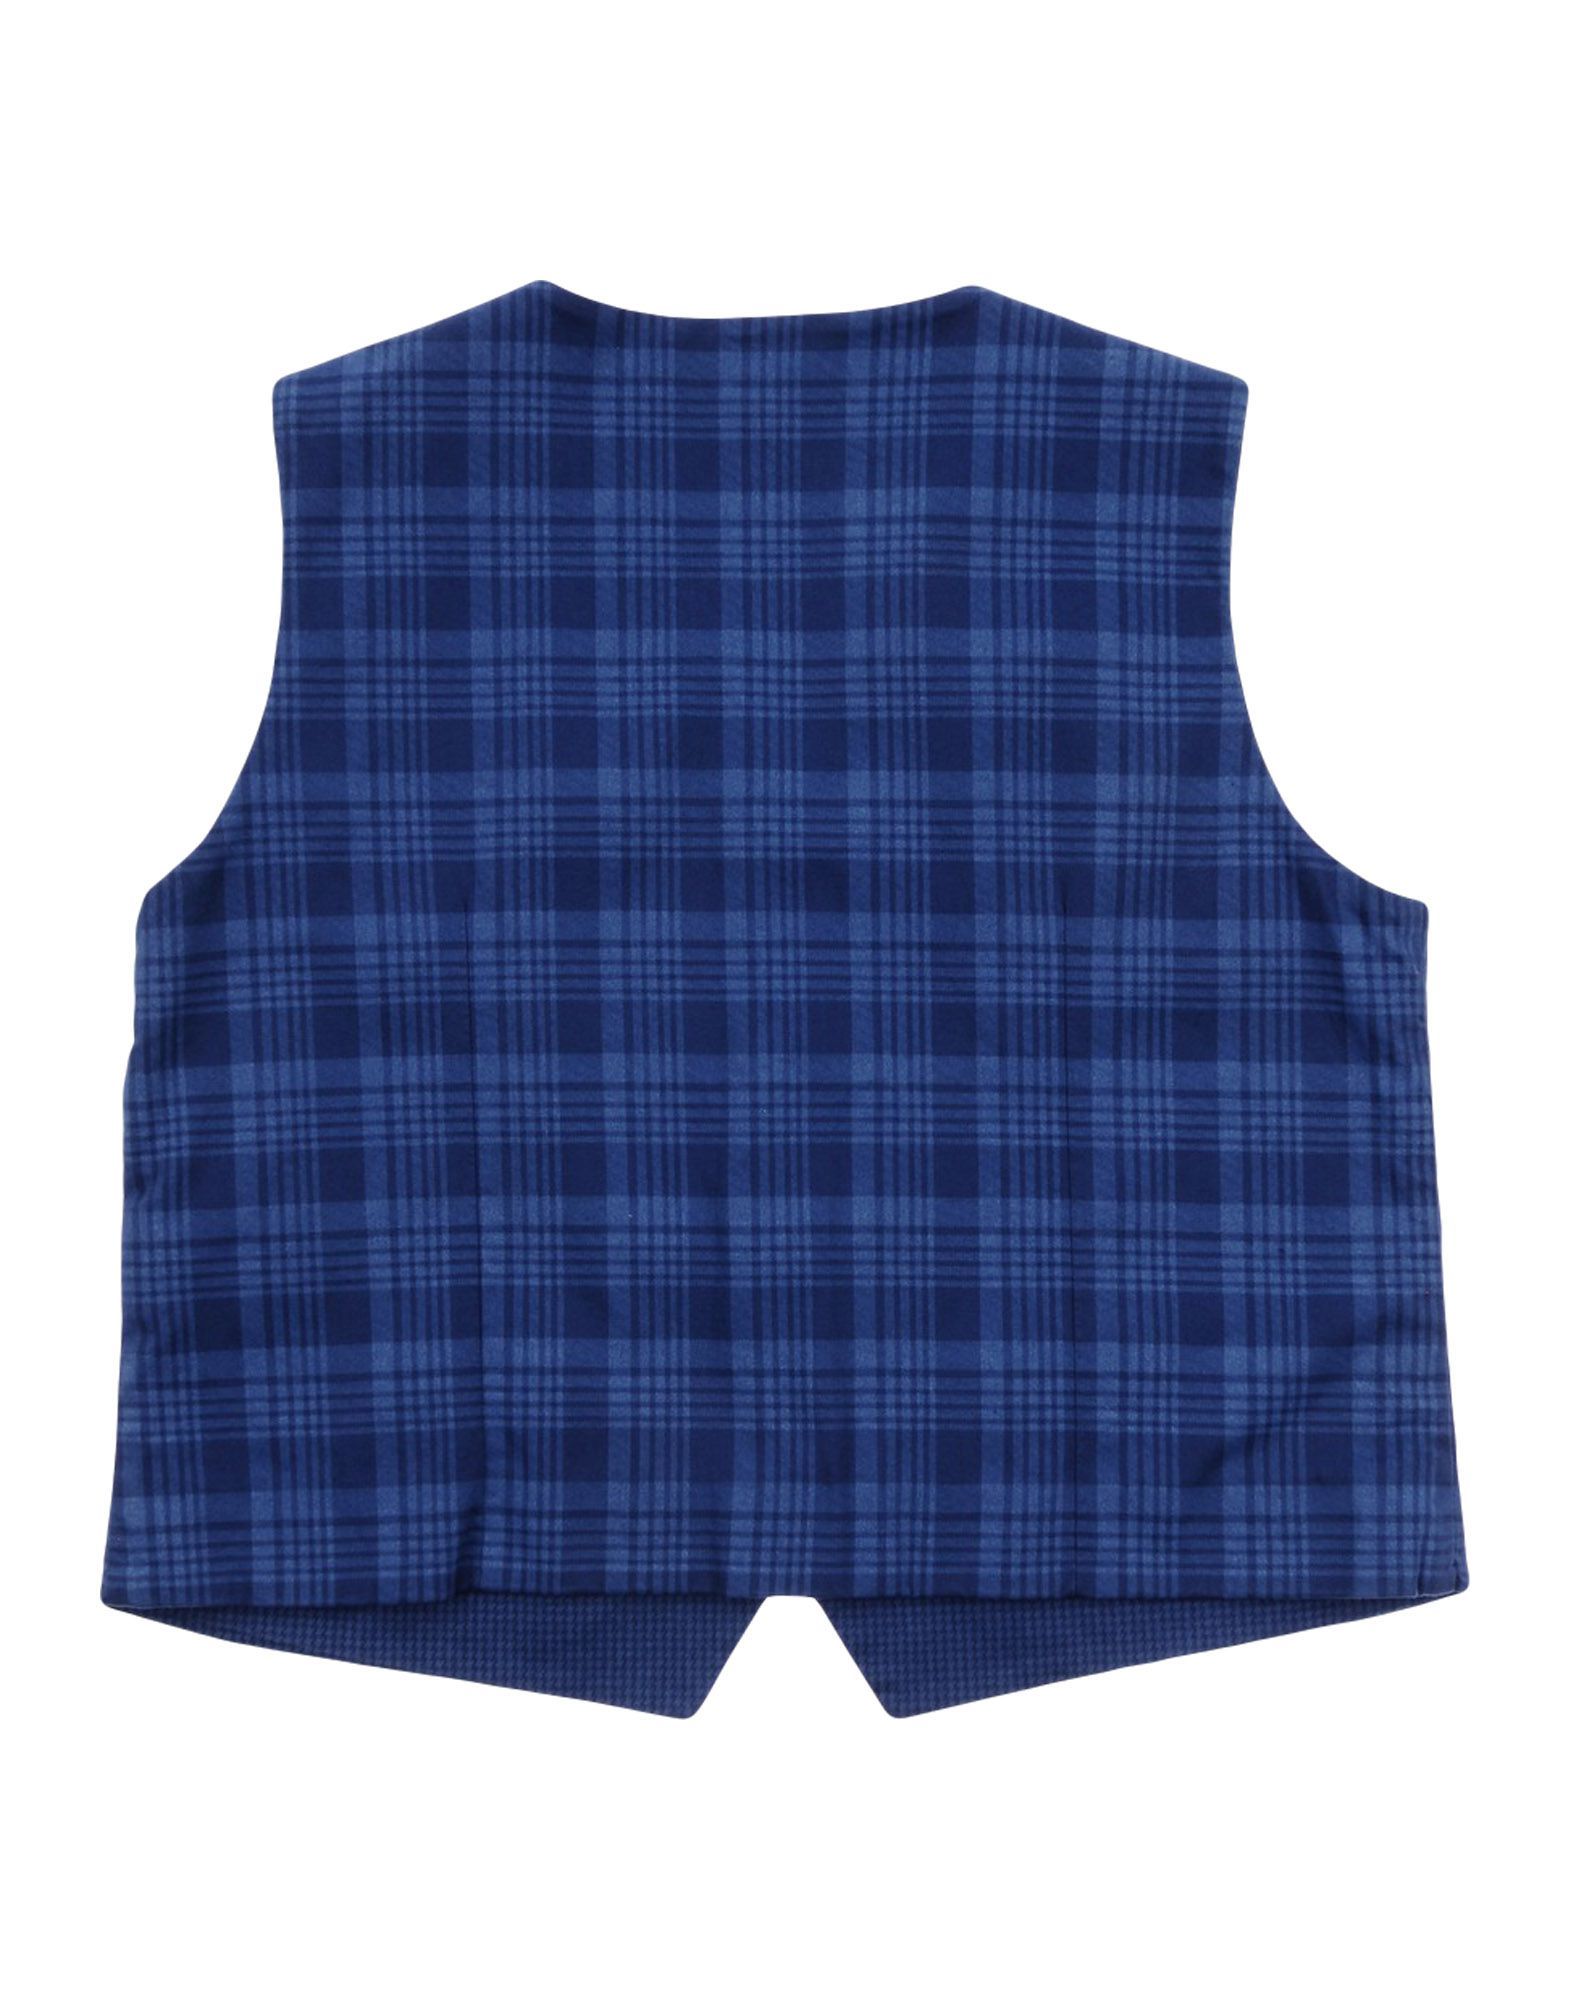 plain weave, no appliqu�s, tartan pattern, multipockets, 4 buttons, v-neckline, single-breasted , sleeveless, wash at 30� c, dry cleanable, iron at 110� c max, do not bleach, do not tumble dry, semi-lined, stretch, button closing waistcoat